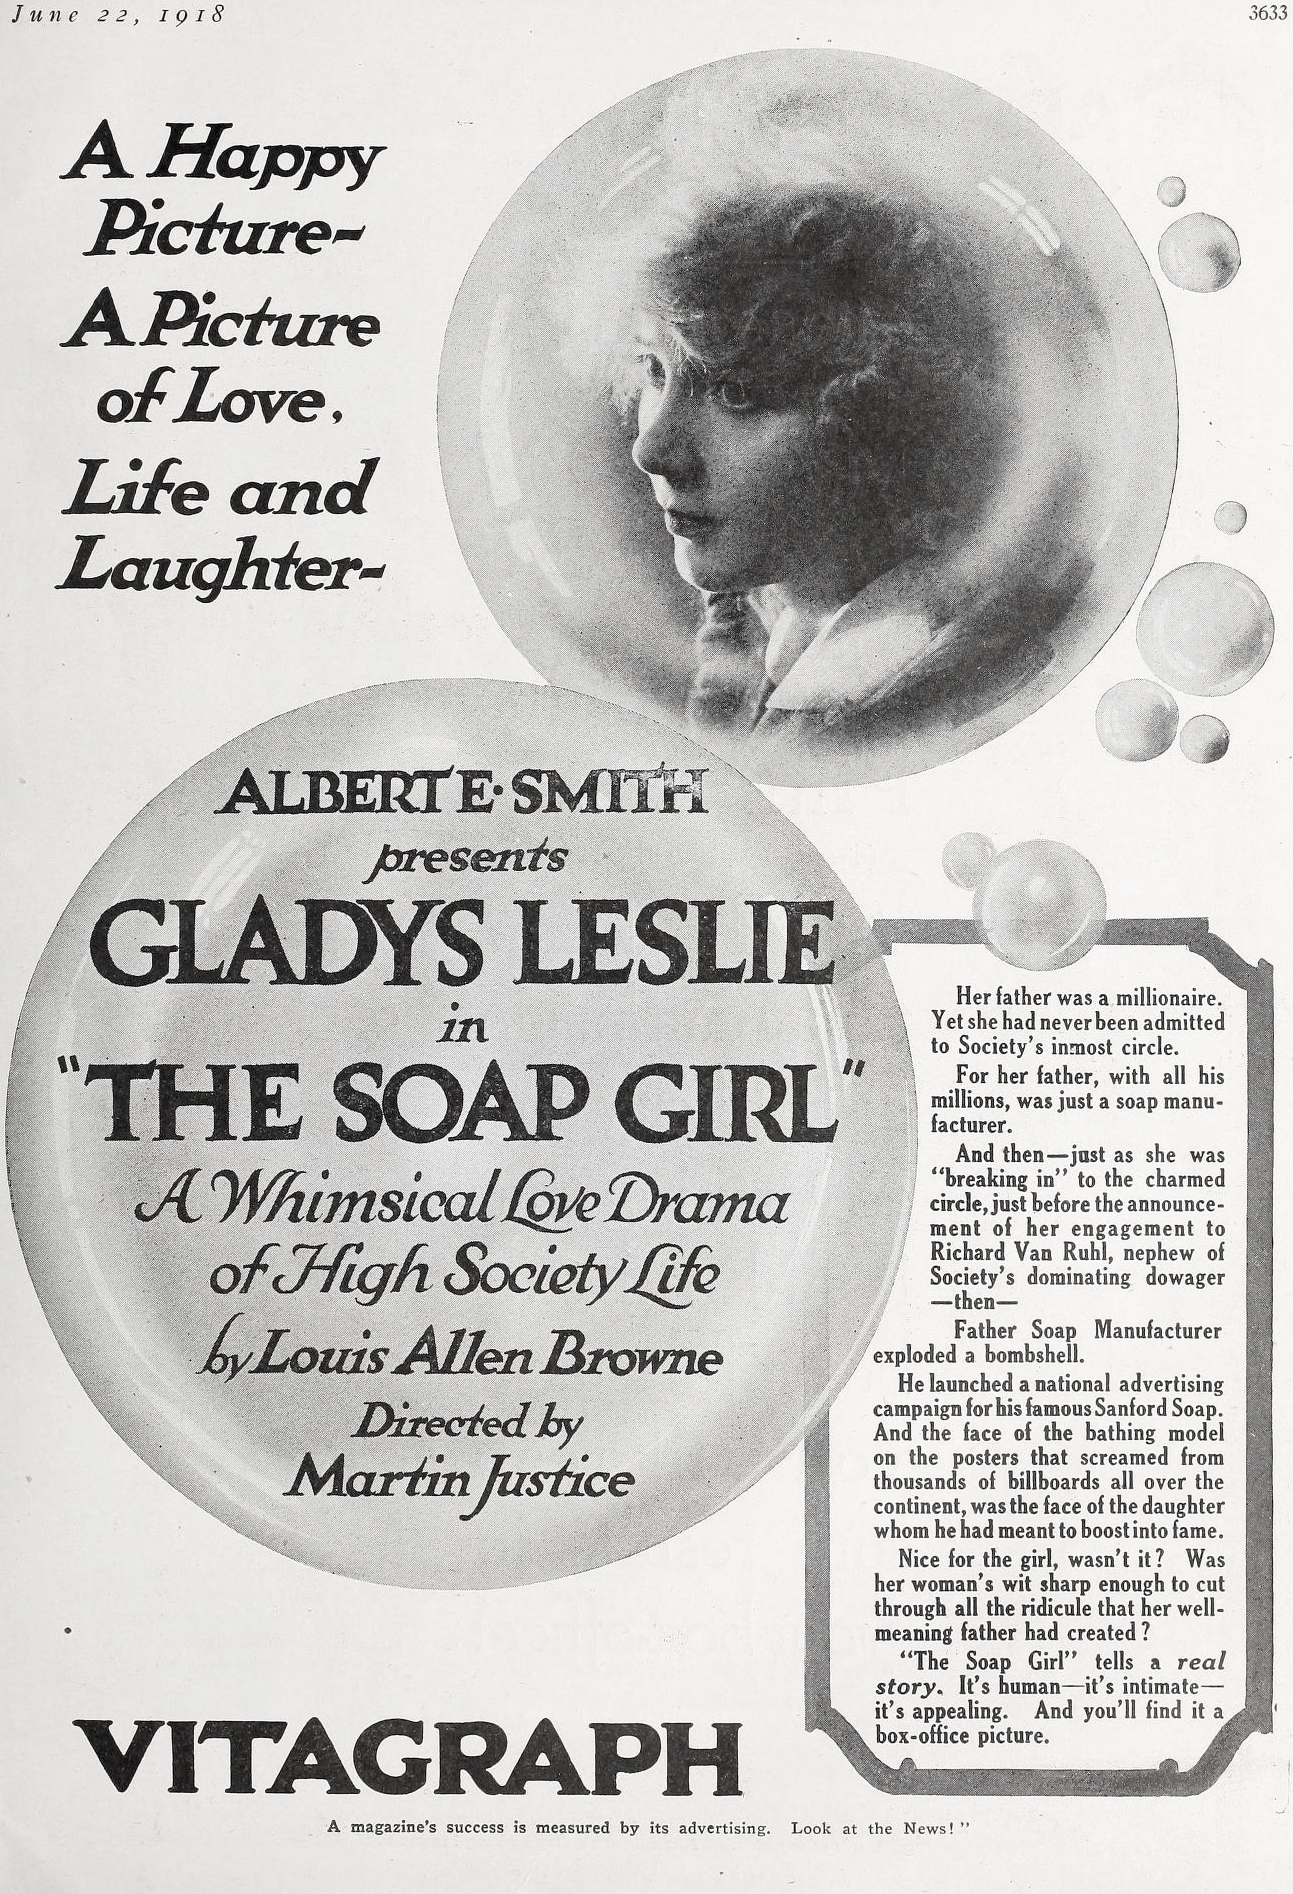 The Soap Girl